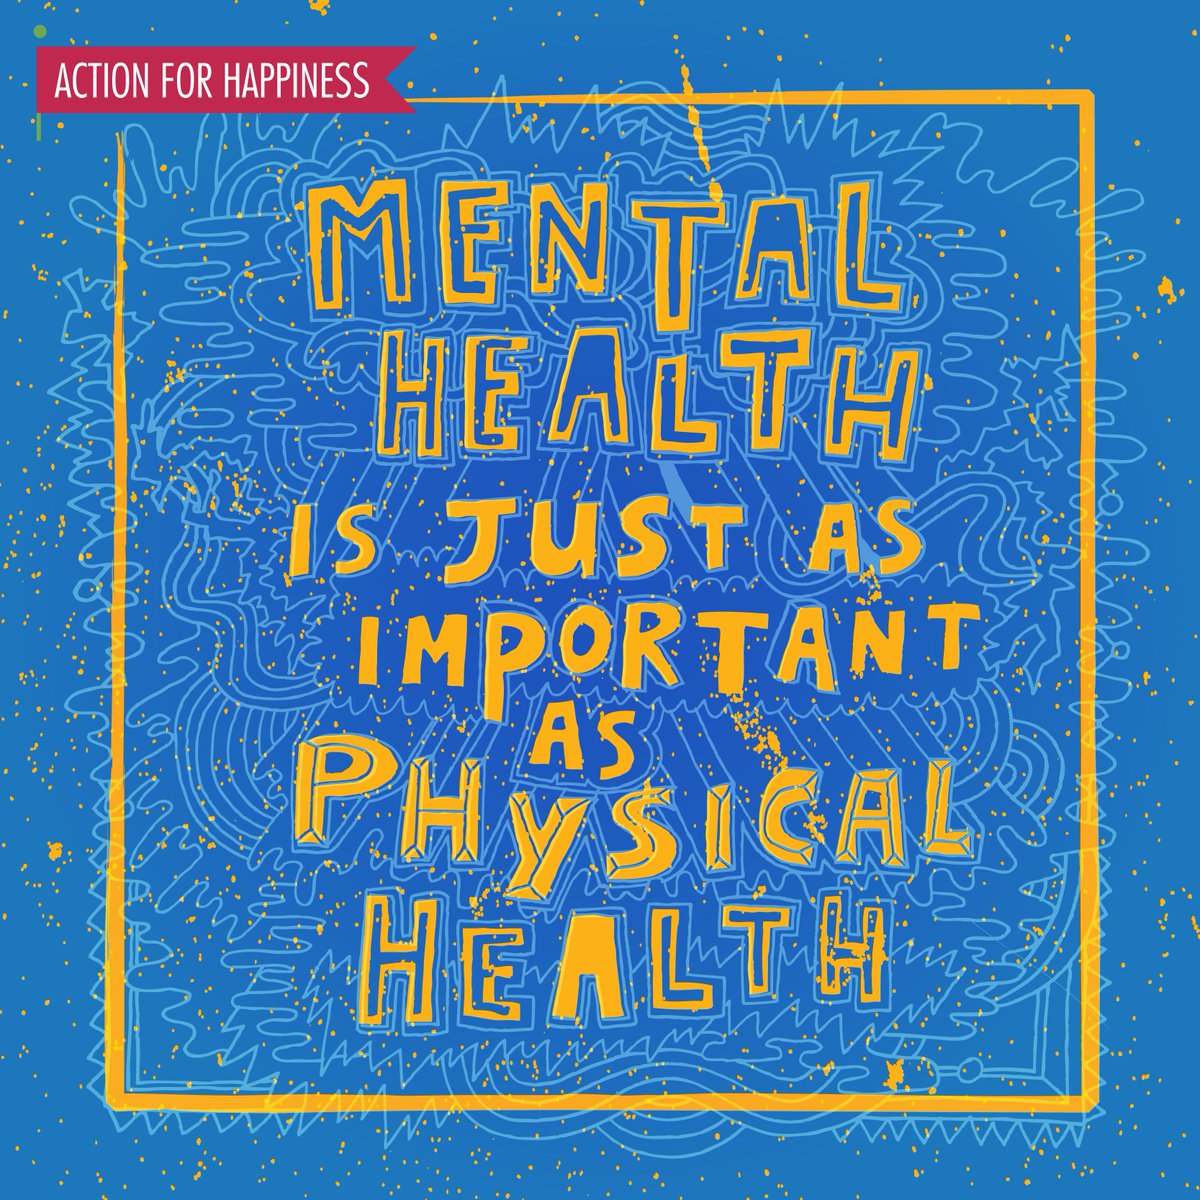 Mental health is just as important as physical health 🧠💪

It's #MensMentalHealthWeek so let's do whatever we can to support all the men in our lives to take action for their mental health